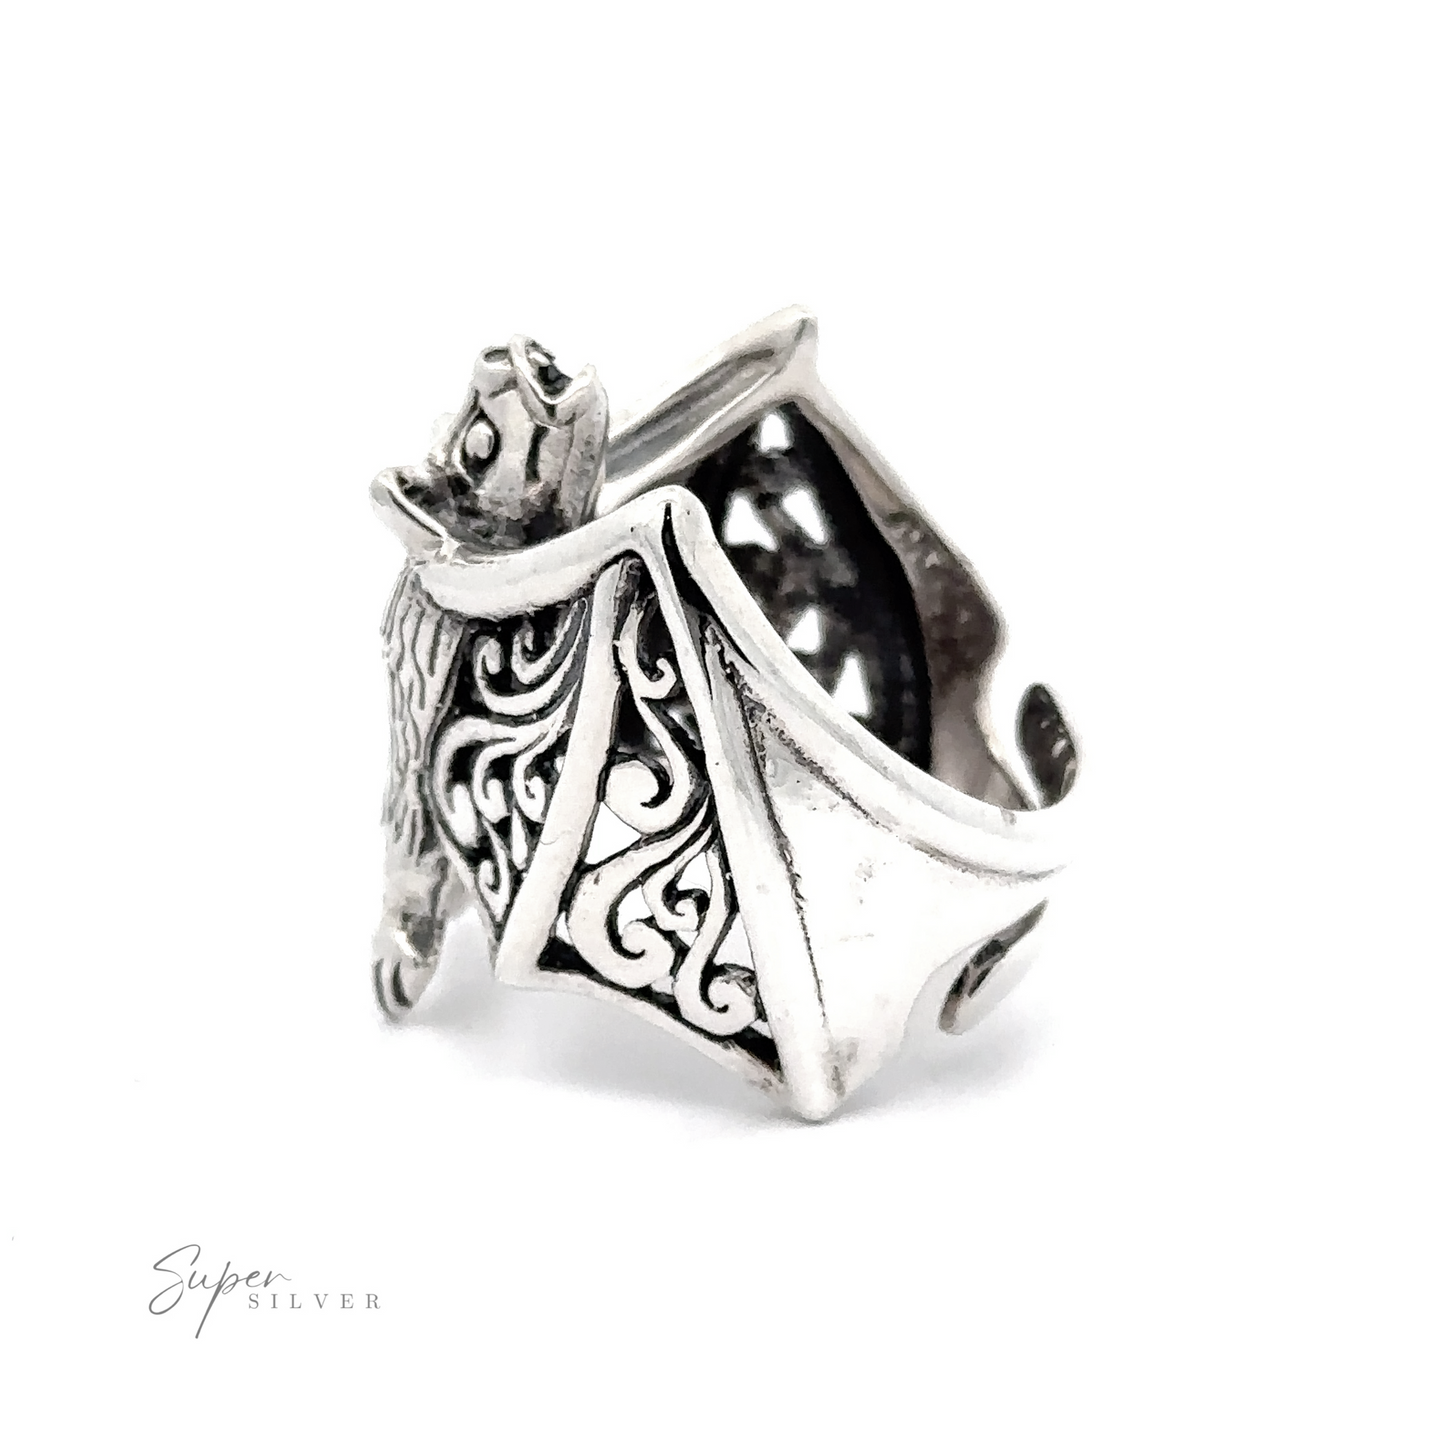 Statement Bat Ring resembling a stylized dragon with intricate designs, isolated on a white background.